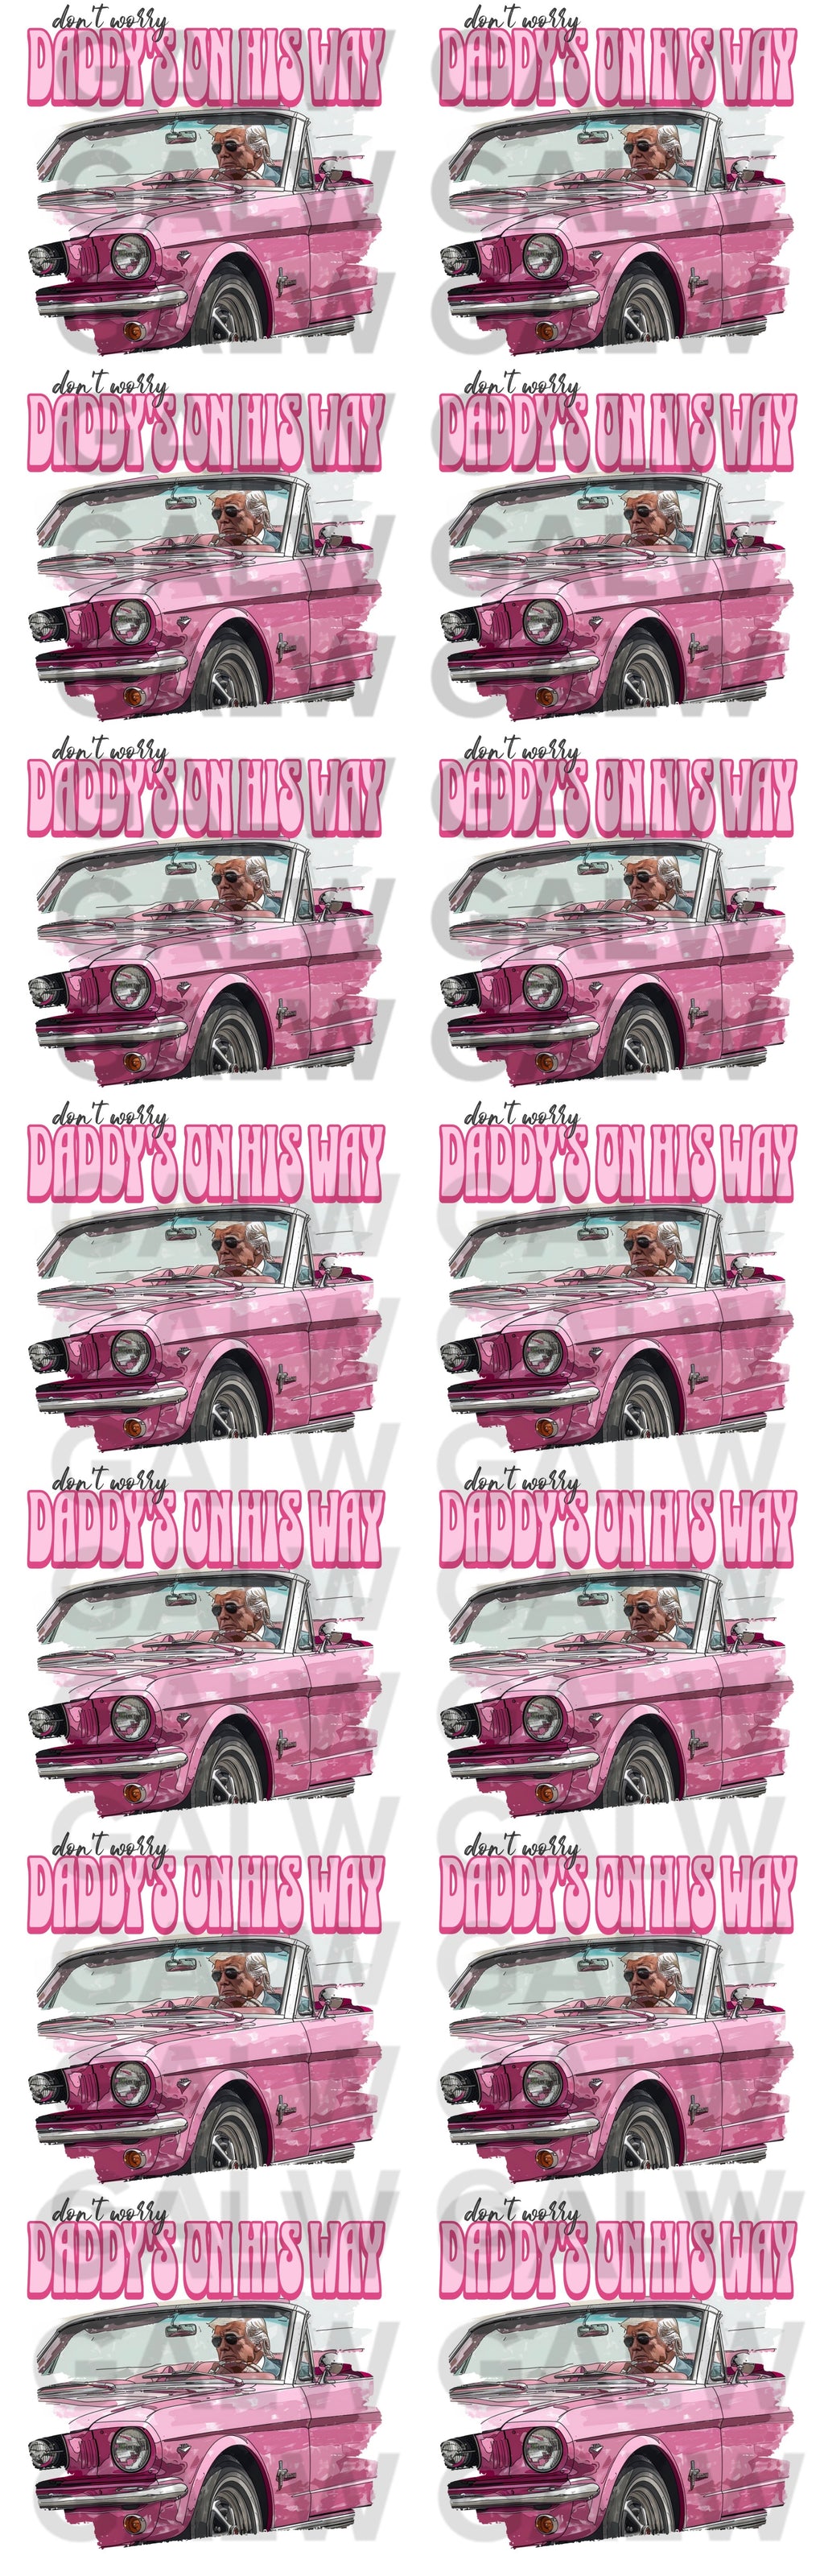 Daddy’s On His Way Pink Car Premade Gang Sheet